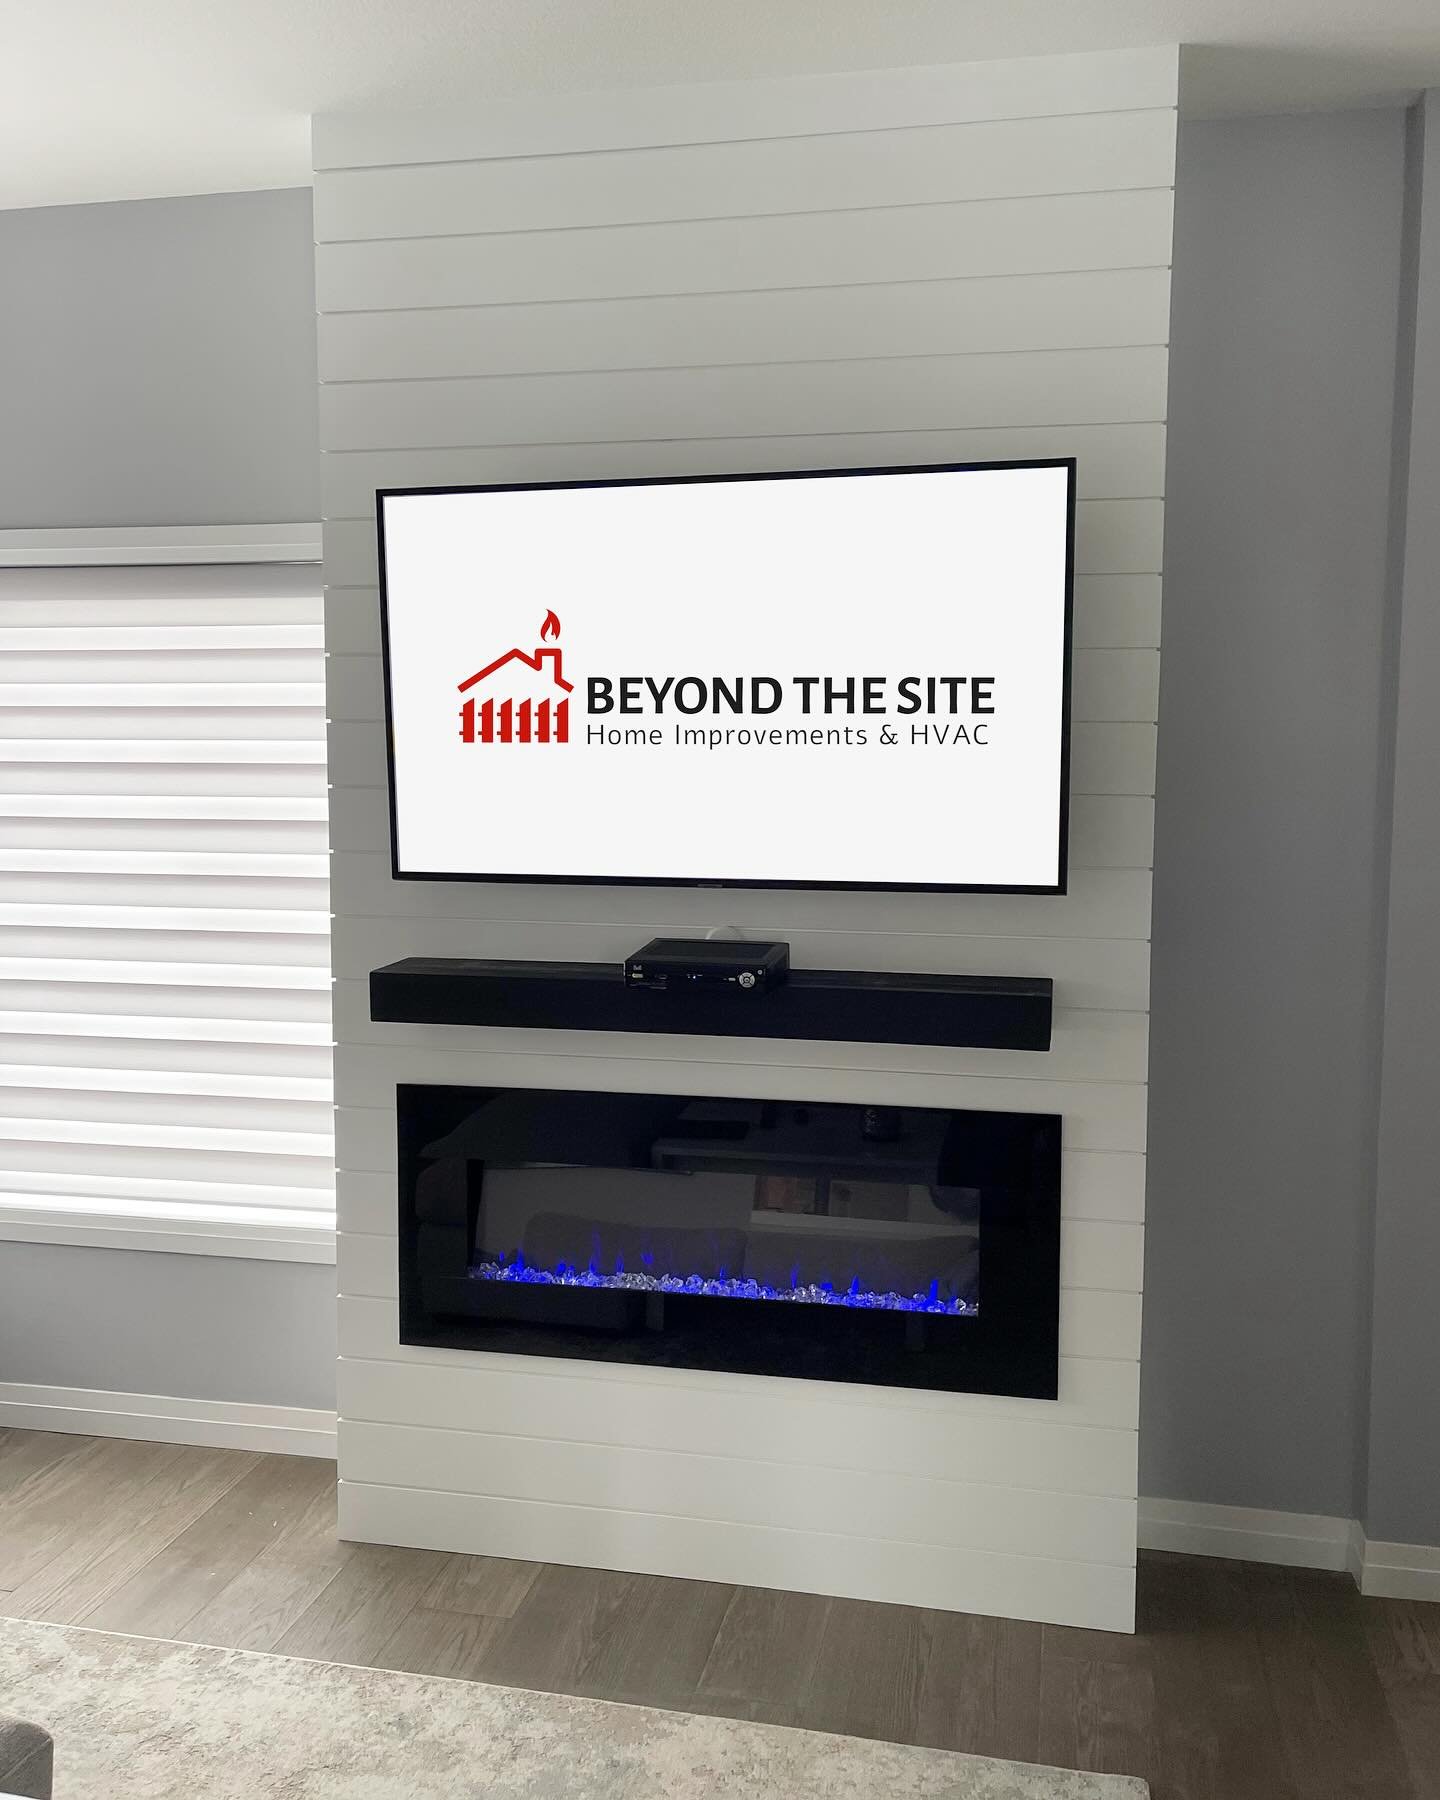 Shiplap TV &amp; Fireplace Set Up 👌🏼

Looking to update some of your homes interior? Give us a call! 

(905) 541-5888 
www.beyondthesite.ca

#beyondthesite #onsite #BTS #jobsite #construction #hvac #milwaukee #carpentry #heating #homeimprovement #r